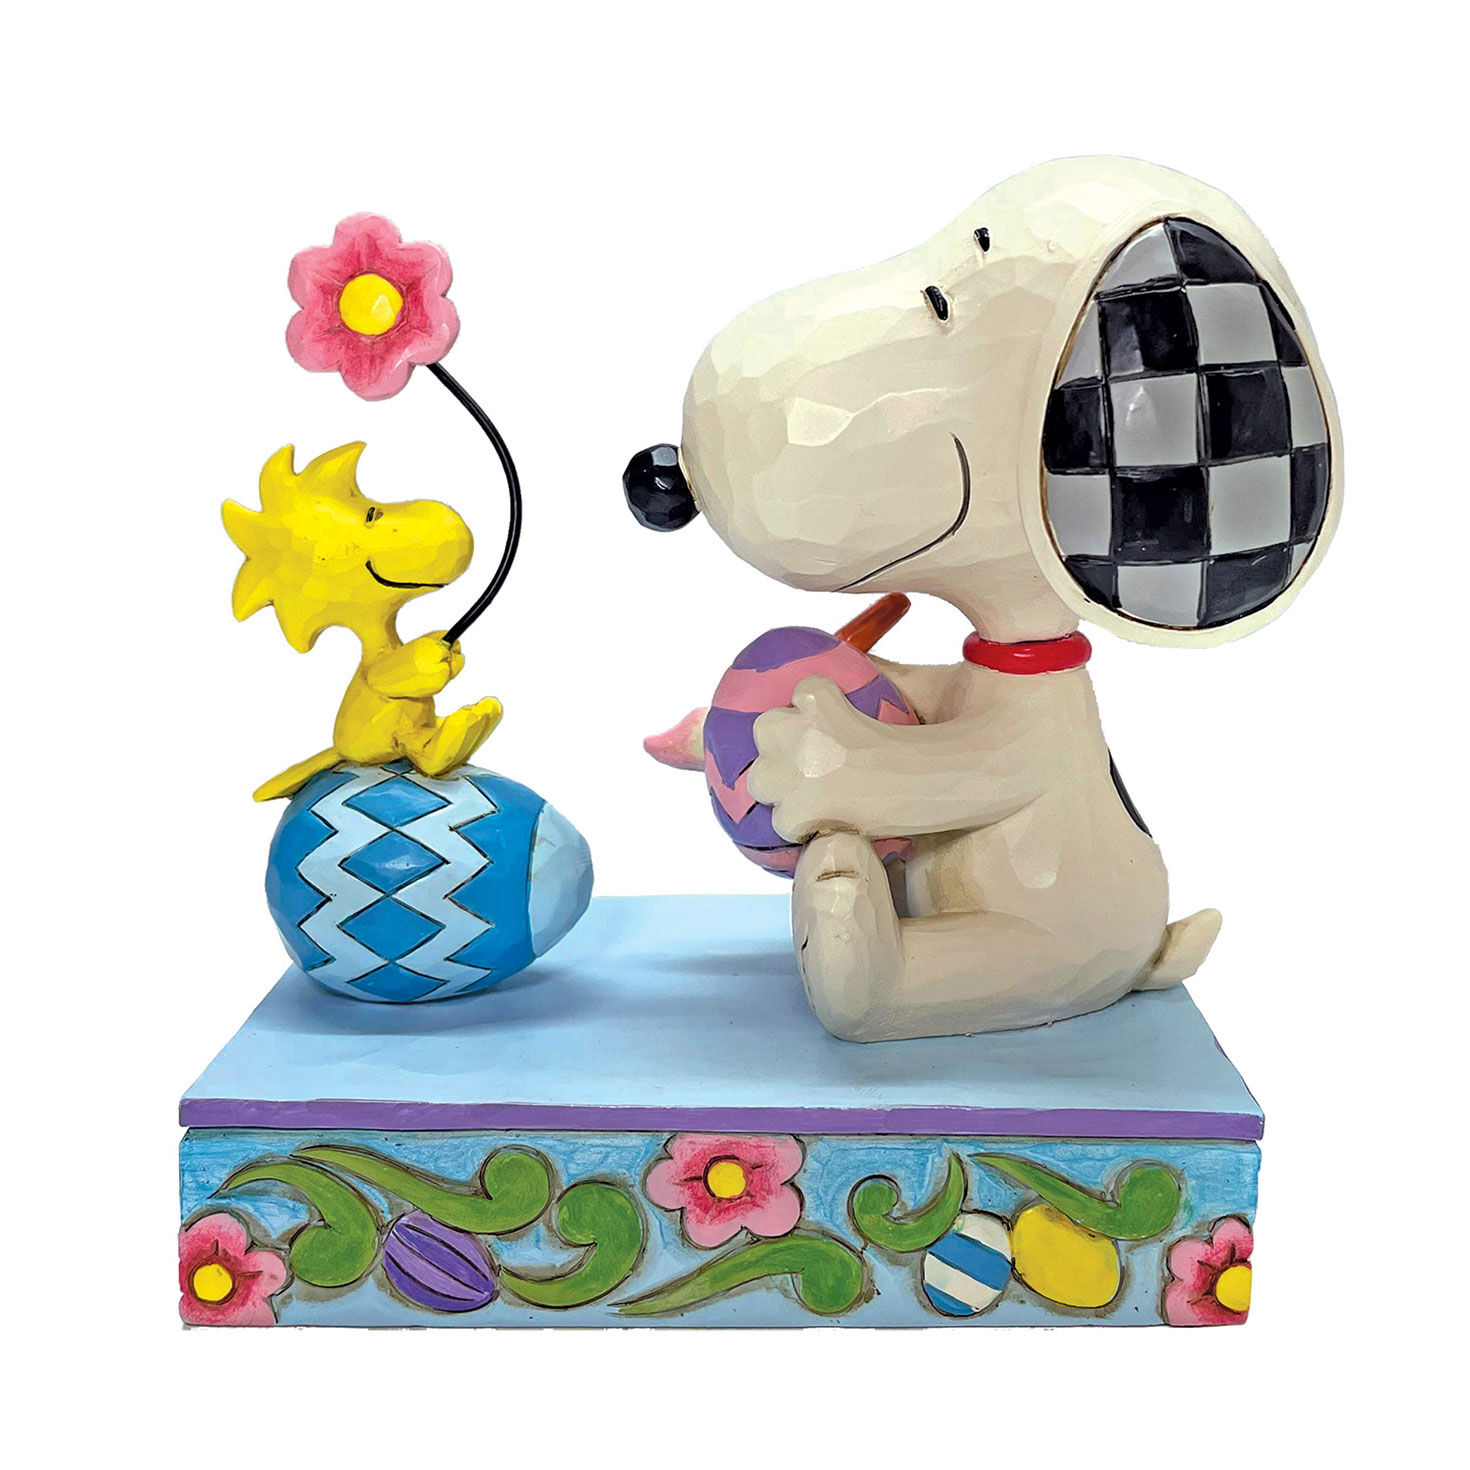 Peanuts® Snoopy and Woodstock Better Together Gift Set - Gift Sets